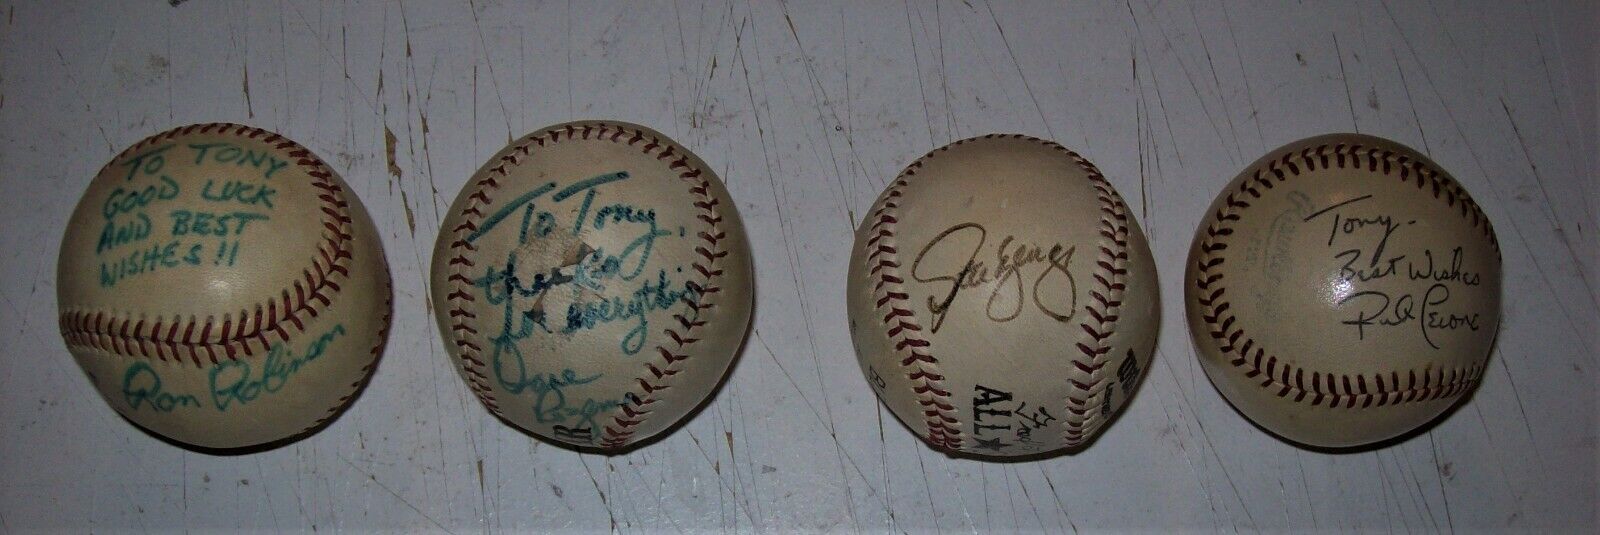 LOT OF 4 DIFF. AUTOGRAPHED BB's: S.YEAGER, R.ROBINSON; R.CERONE; D.ROZEMA Без бренда